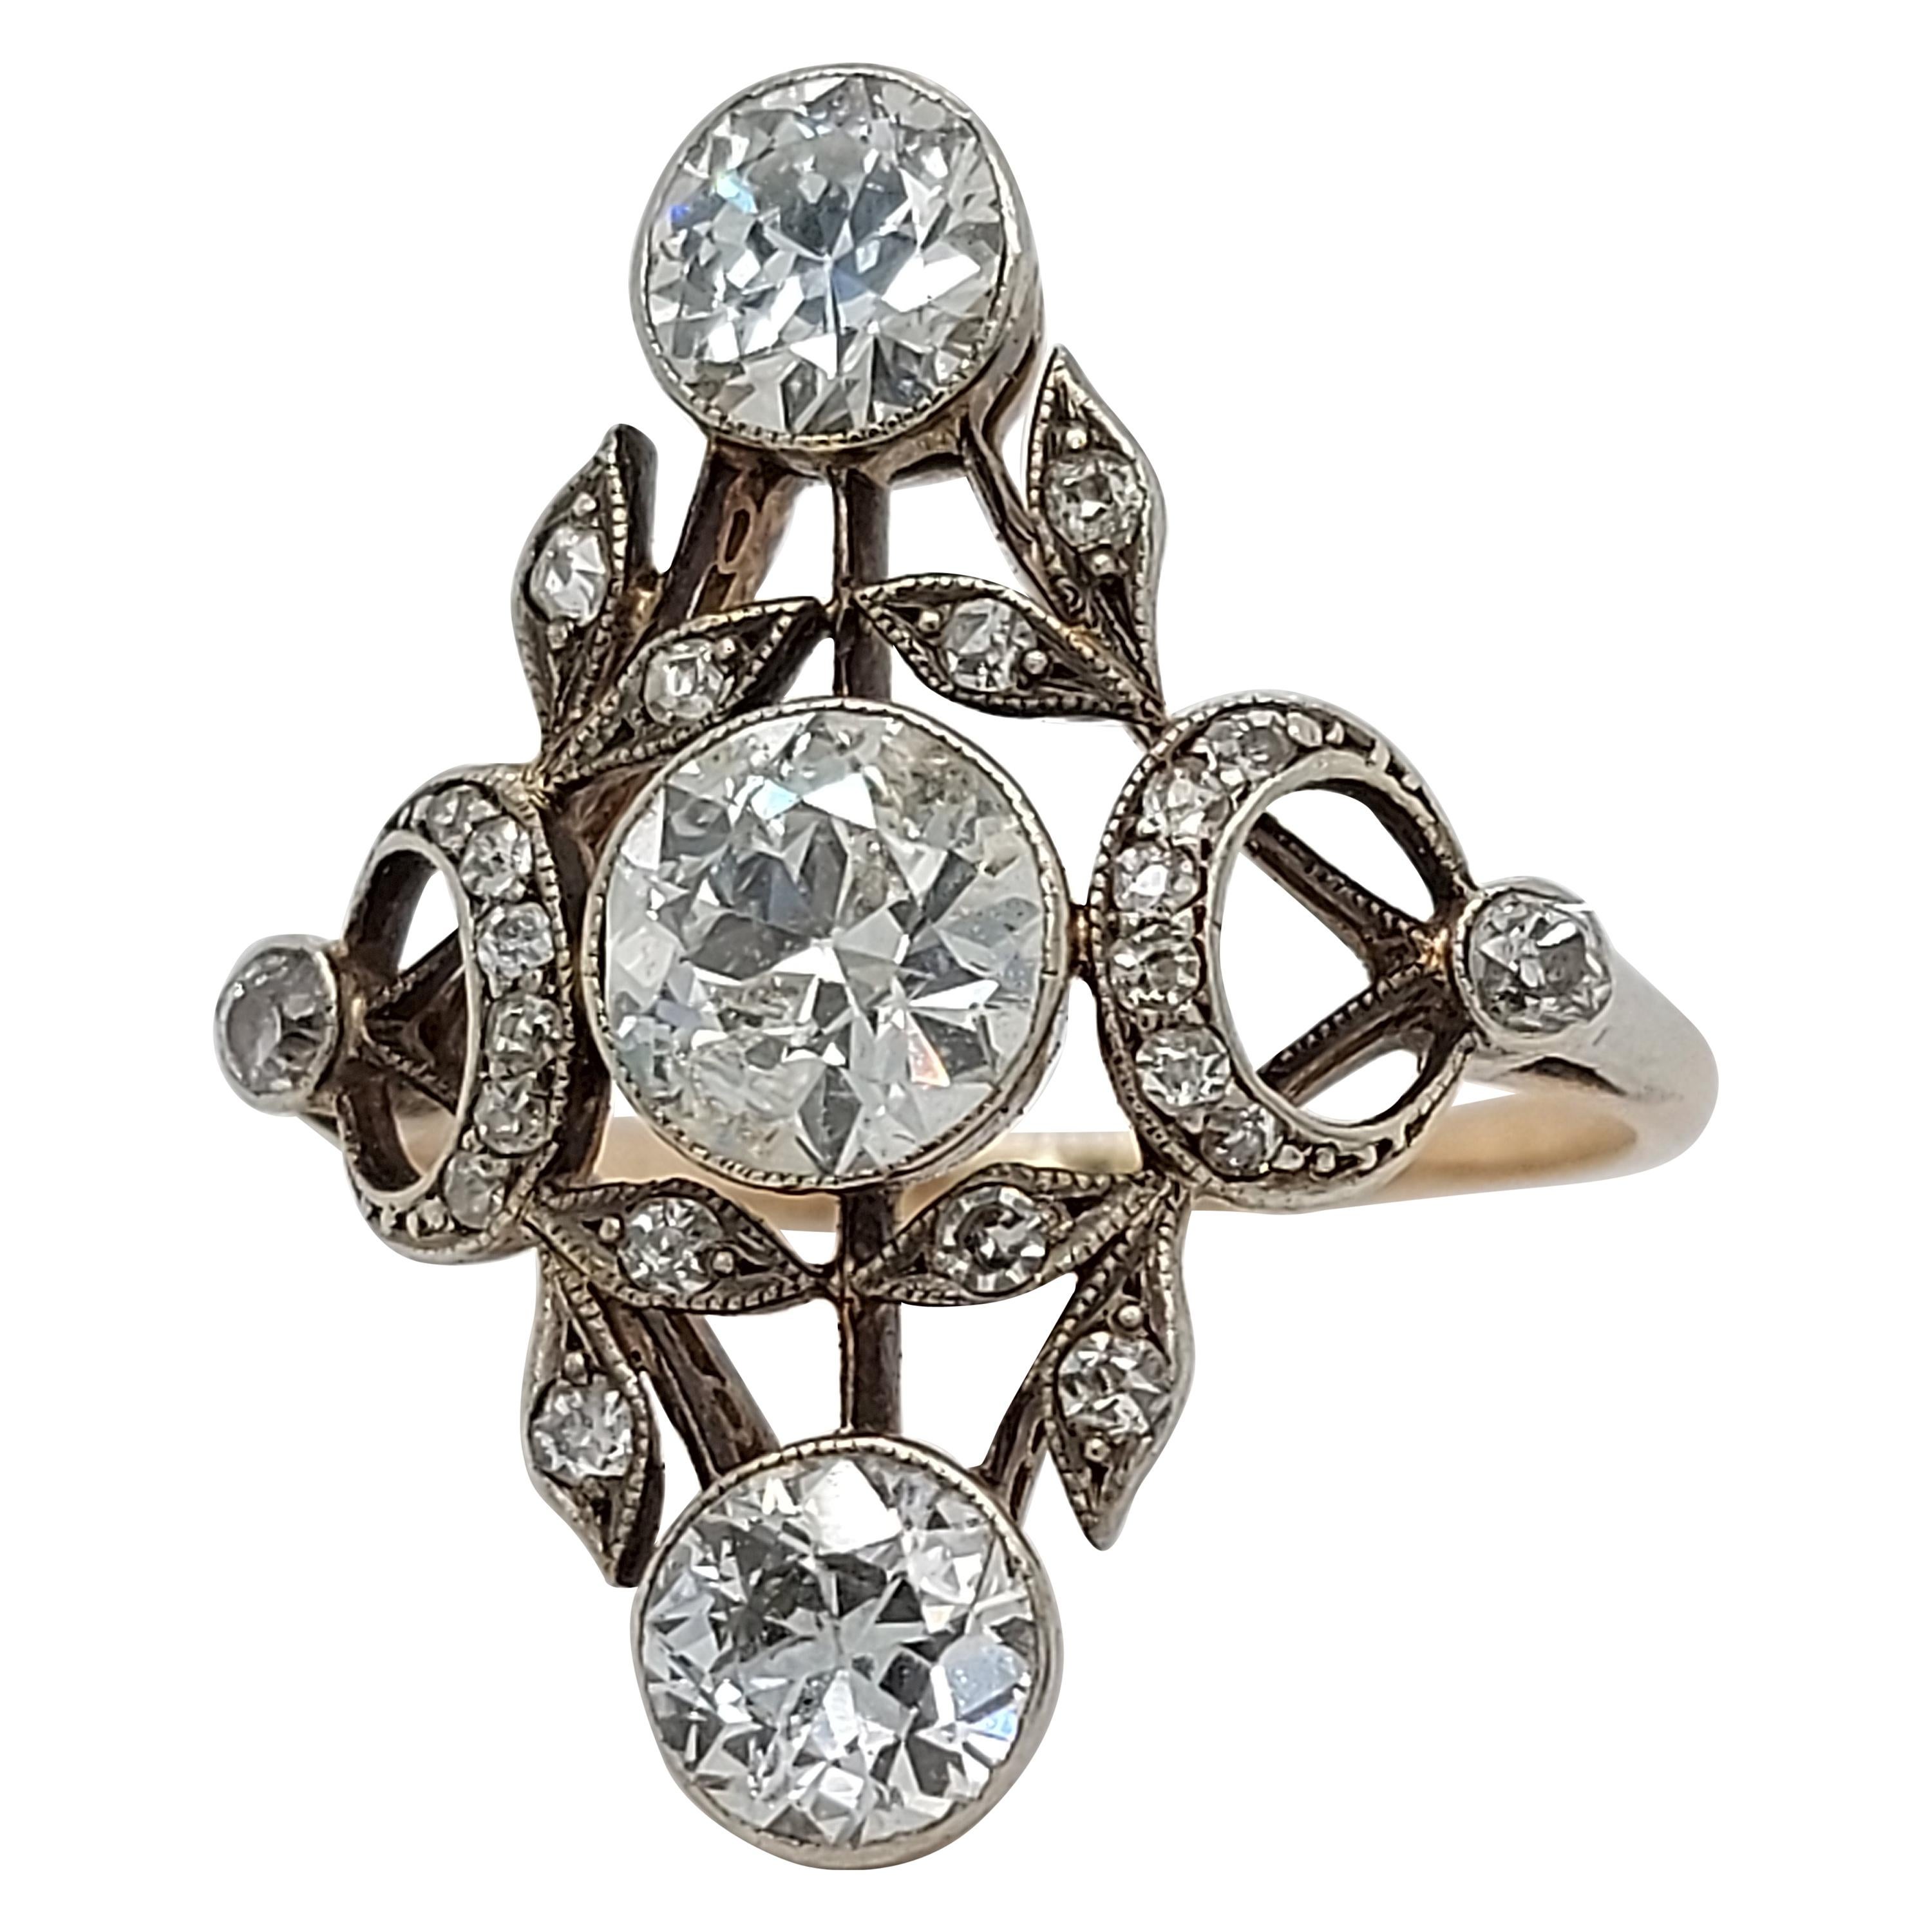 Stunning 18 Karat Gold and Silver Ring with Diamonds from the 1900s, Trilogy For Sale